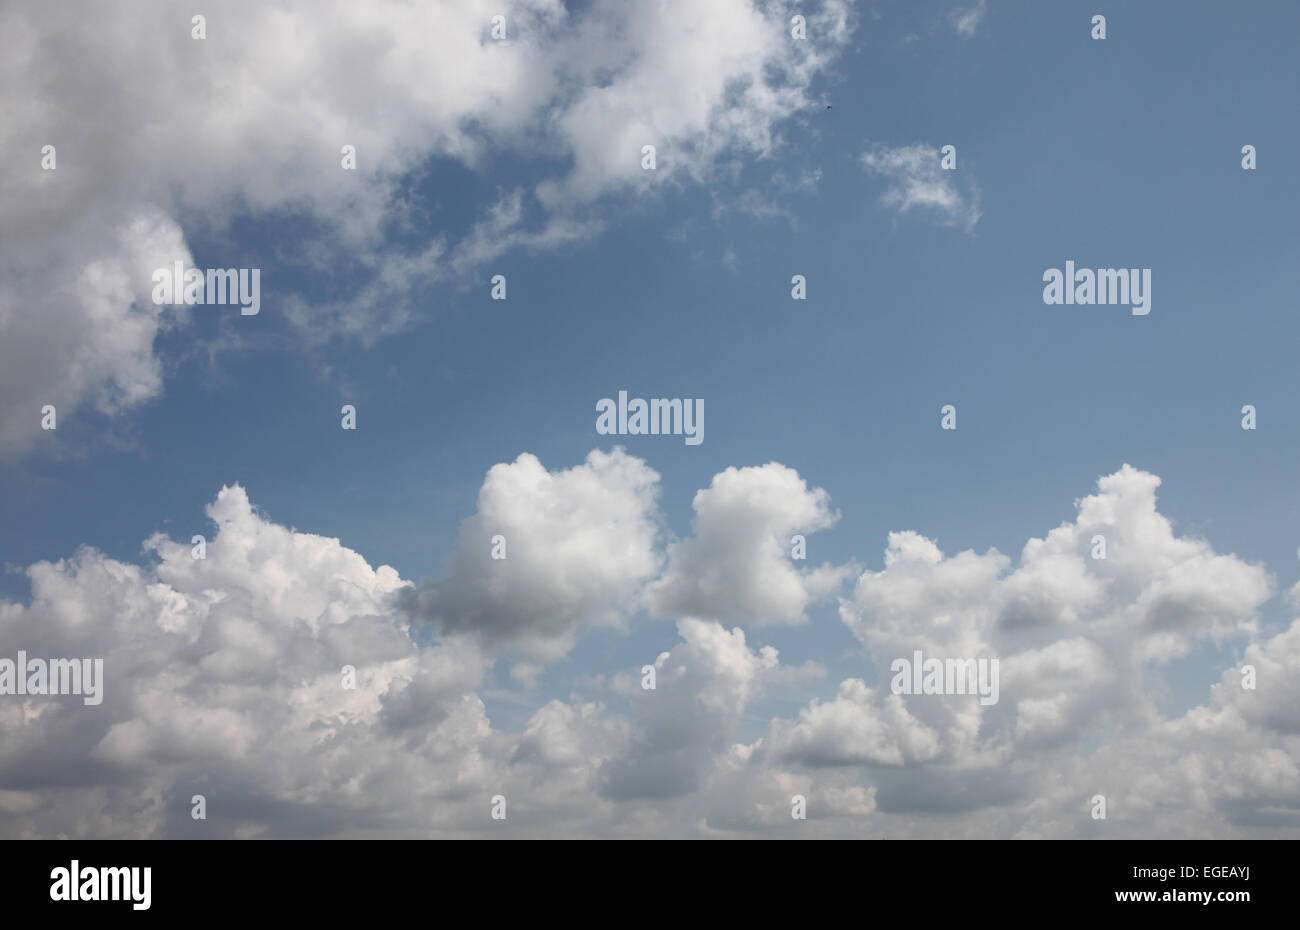 Clouds on the blue sky in the daytime. Stock Photo